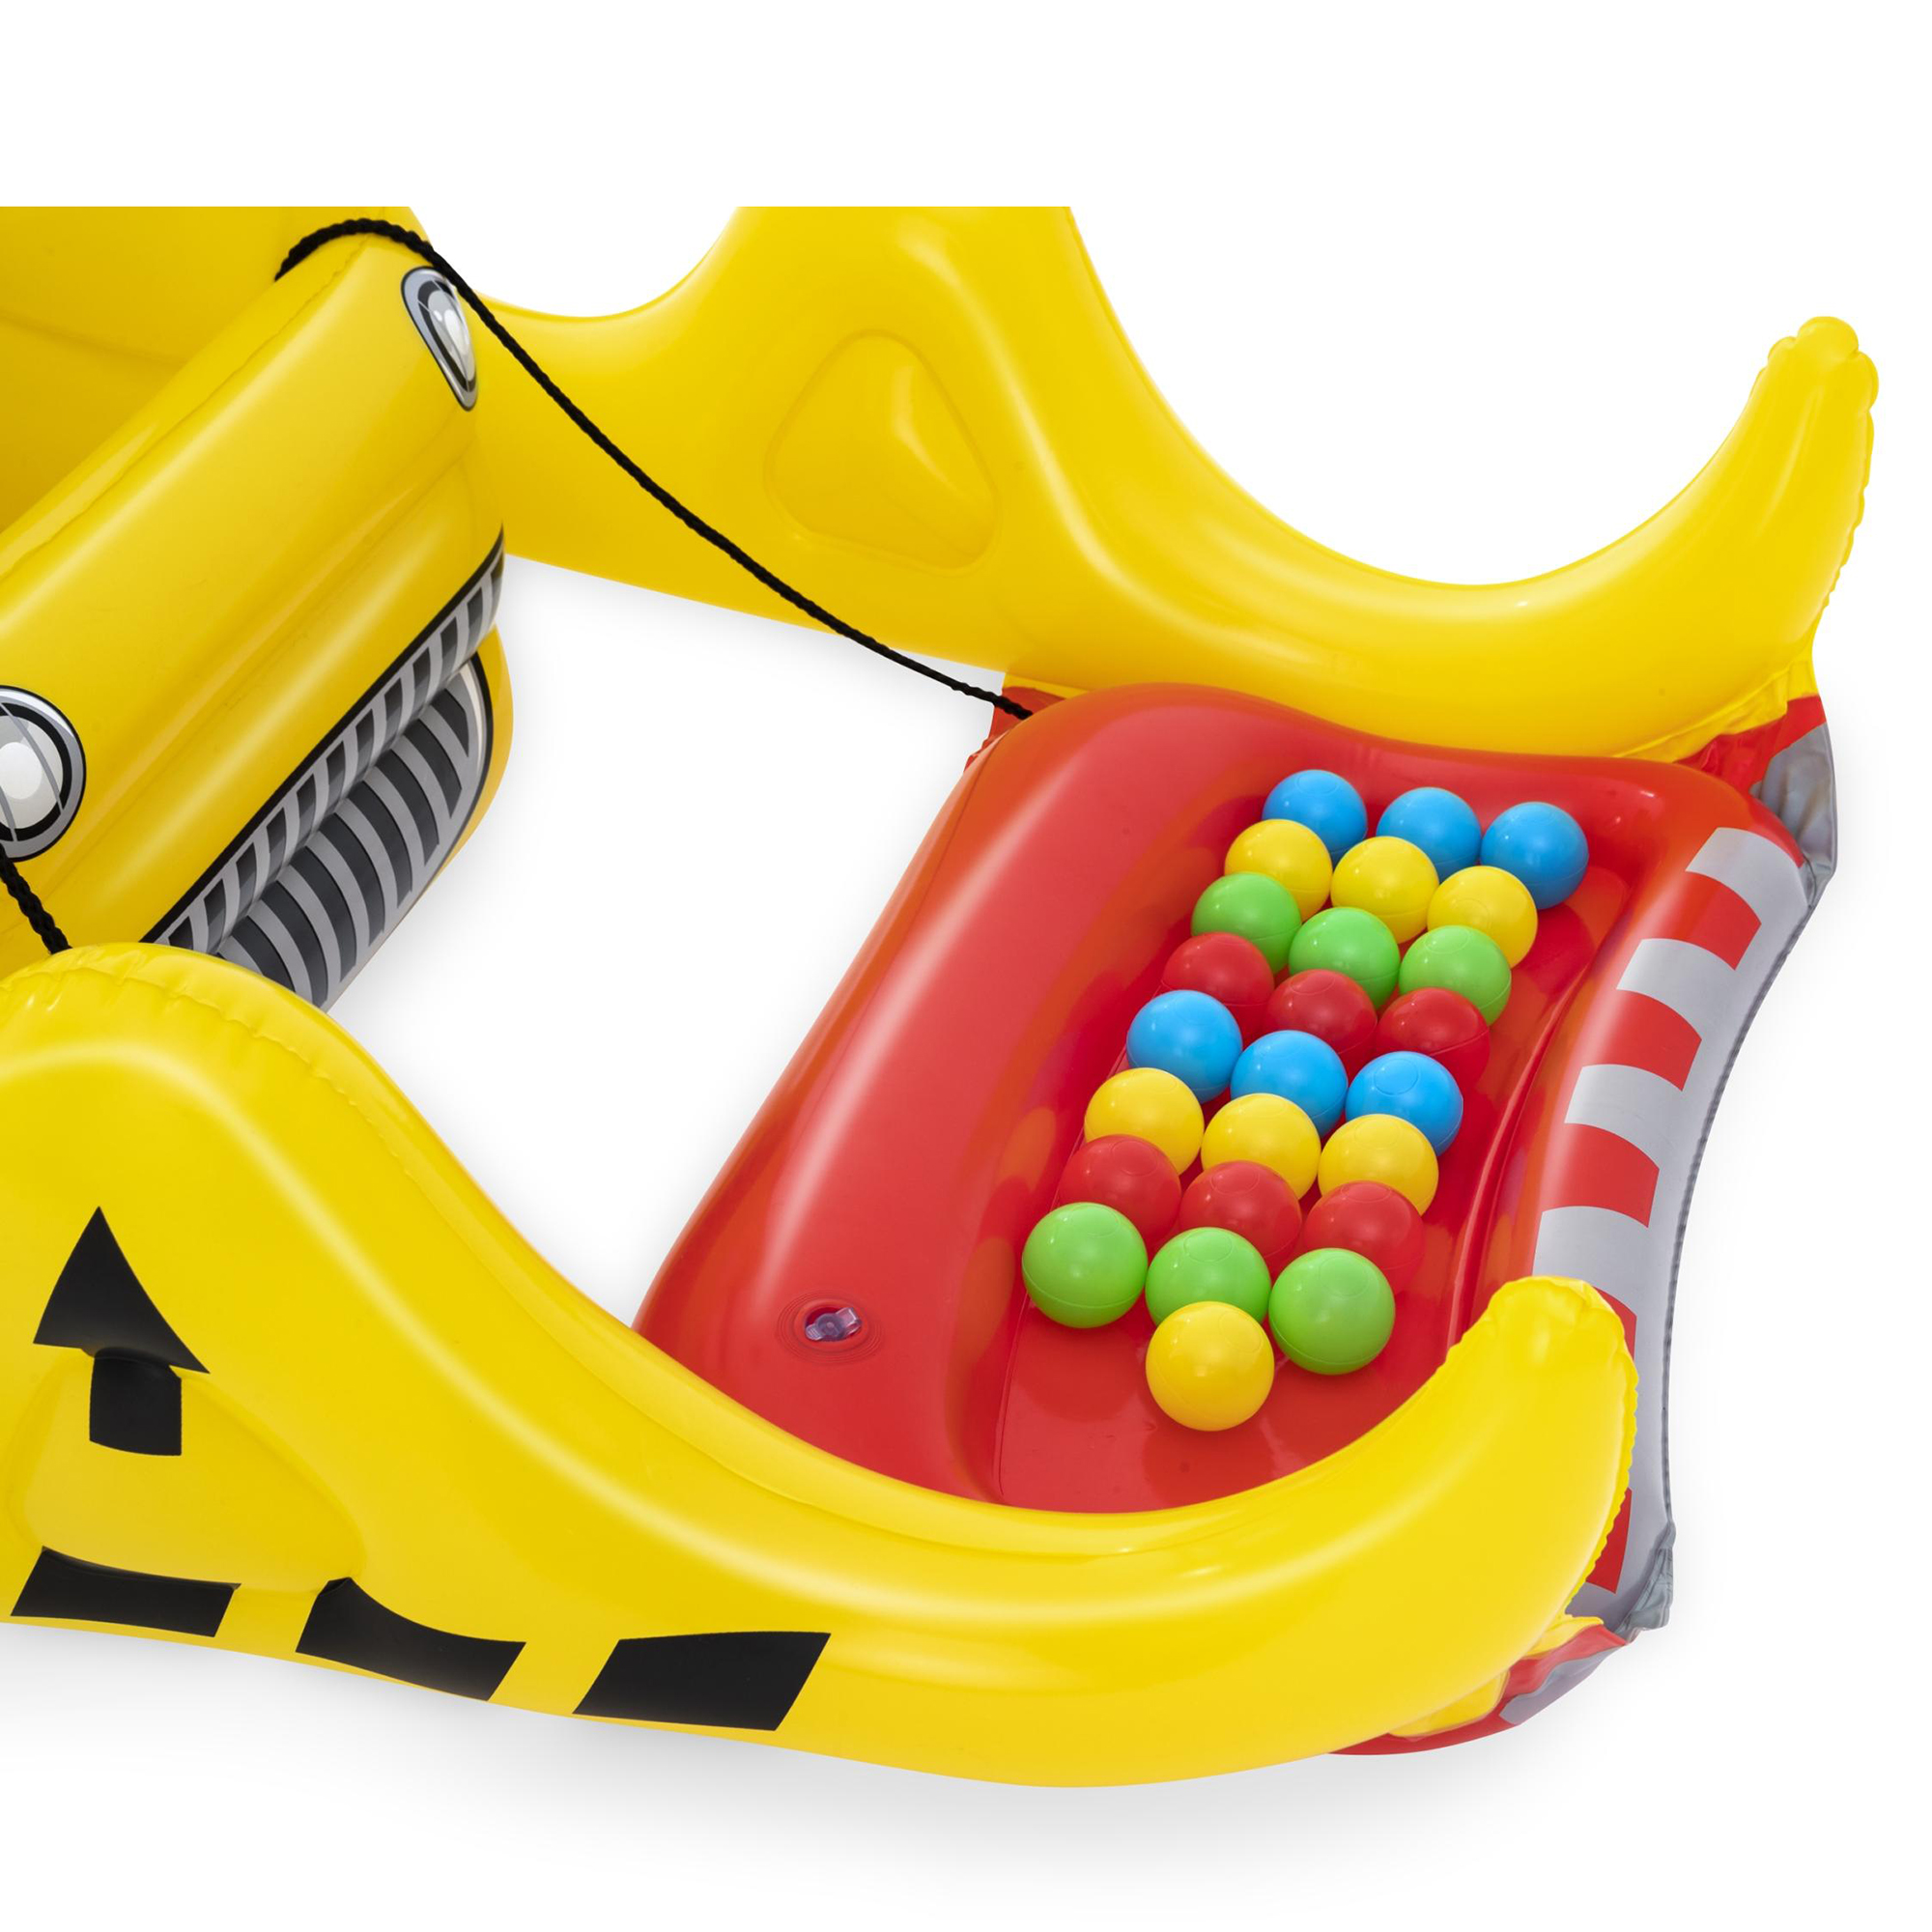 Bestway: Dozer Ball Pit - Inflatable, Indoor/ Outdoor Use, Includes 25 Play Balls, 78x41x33 Inches, Ages 2+ - image 4 of 9